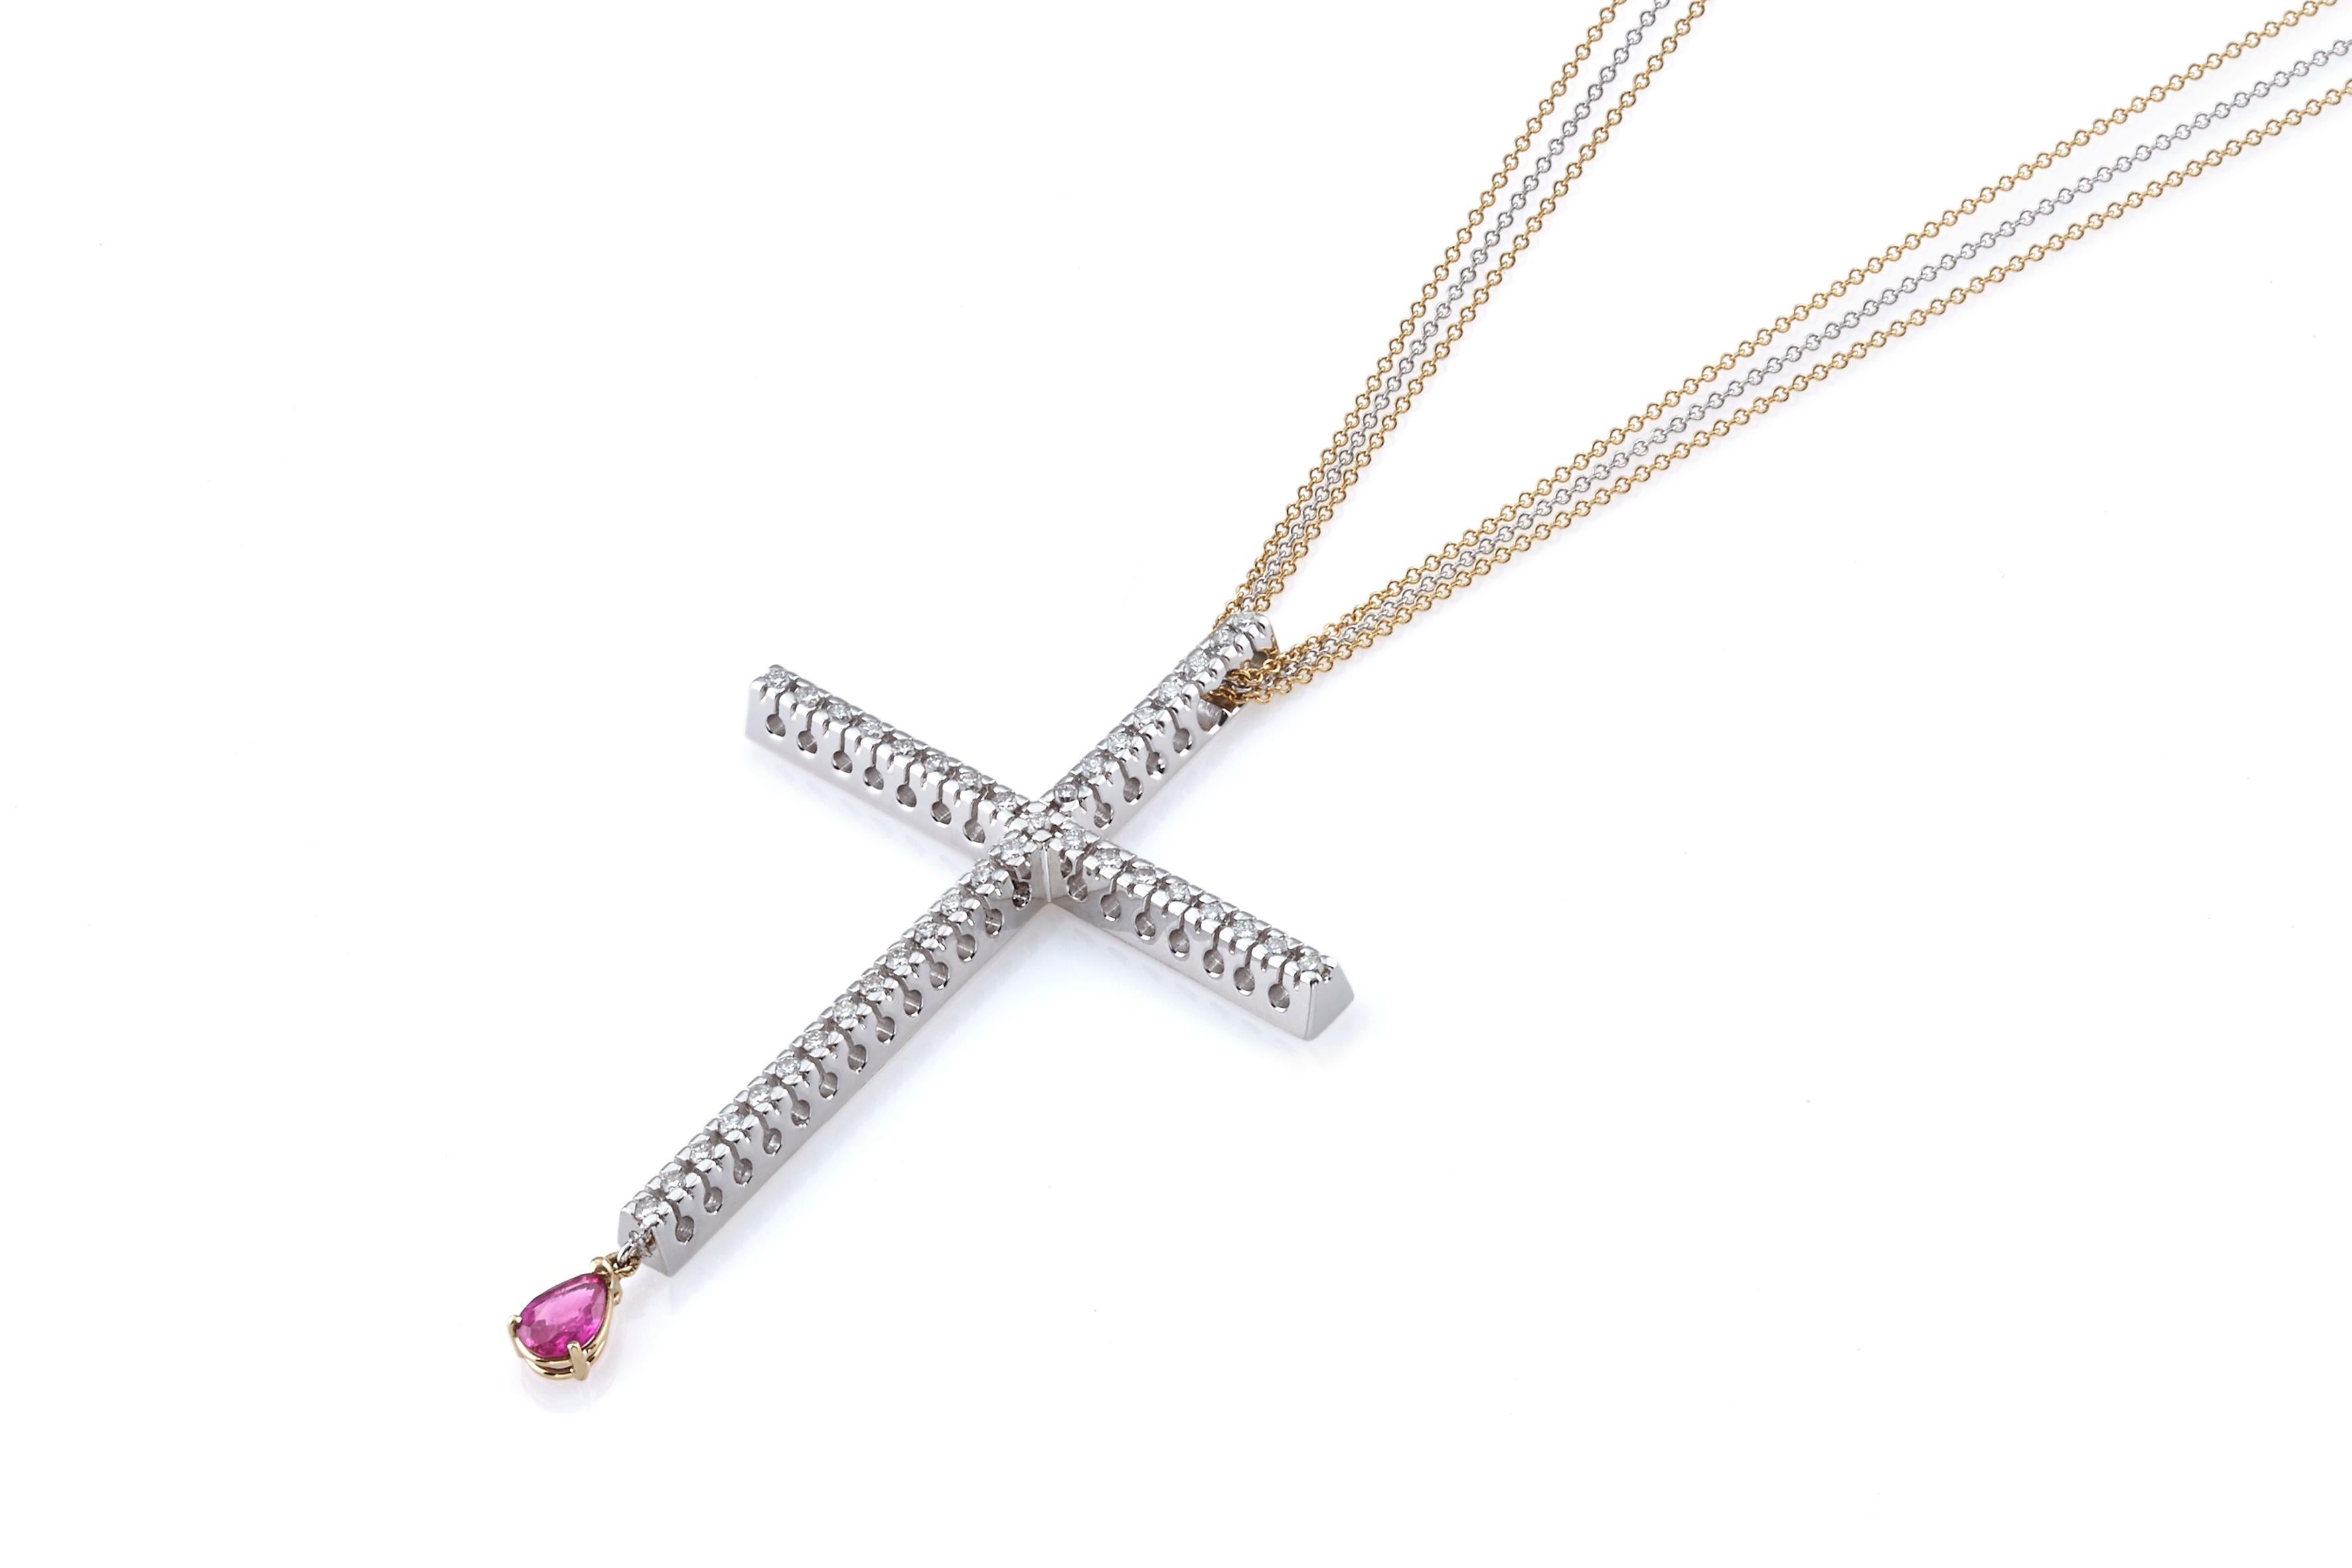 I Believe and it Hurts - Bloody Cross Nicofilimon 2010
Big Cross Necklace in white gold 18Kt with diamonds and ruby.
This handcrafted 18kt white gold bloody necklace features a ruby gemstone and a line of diamonds along the whole cross. A unique